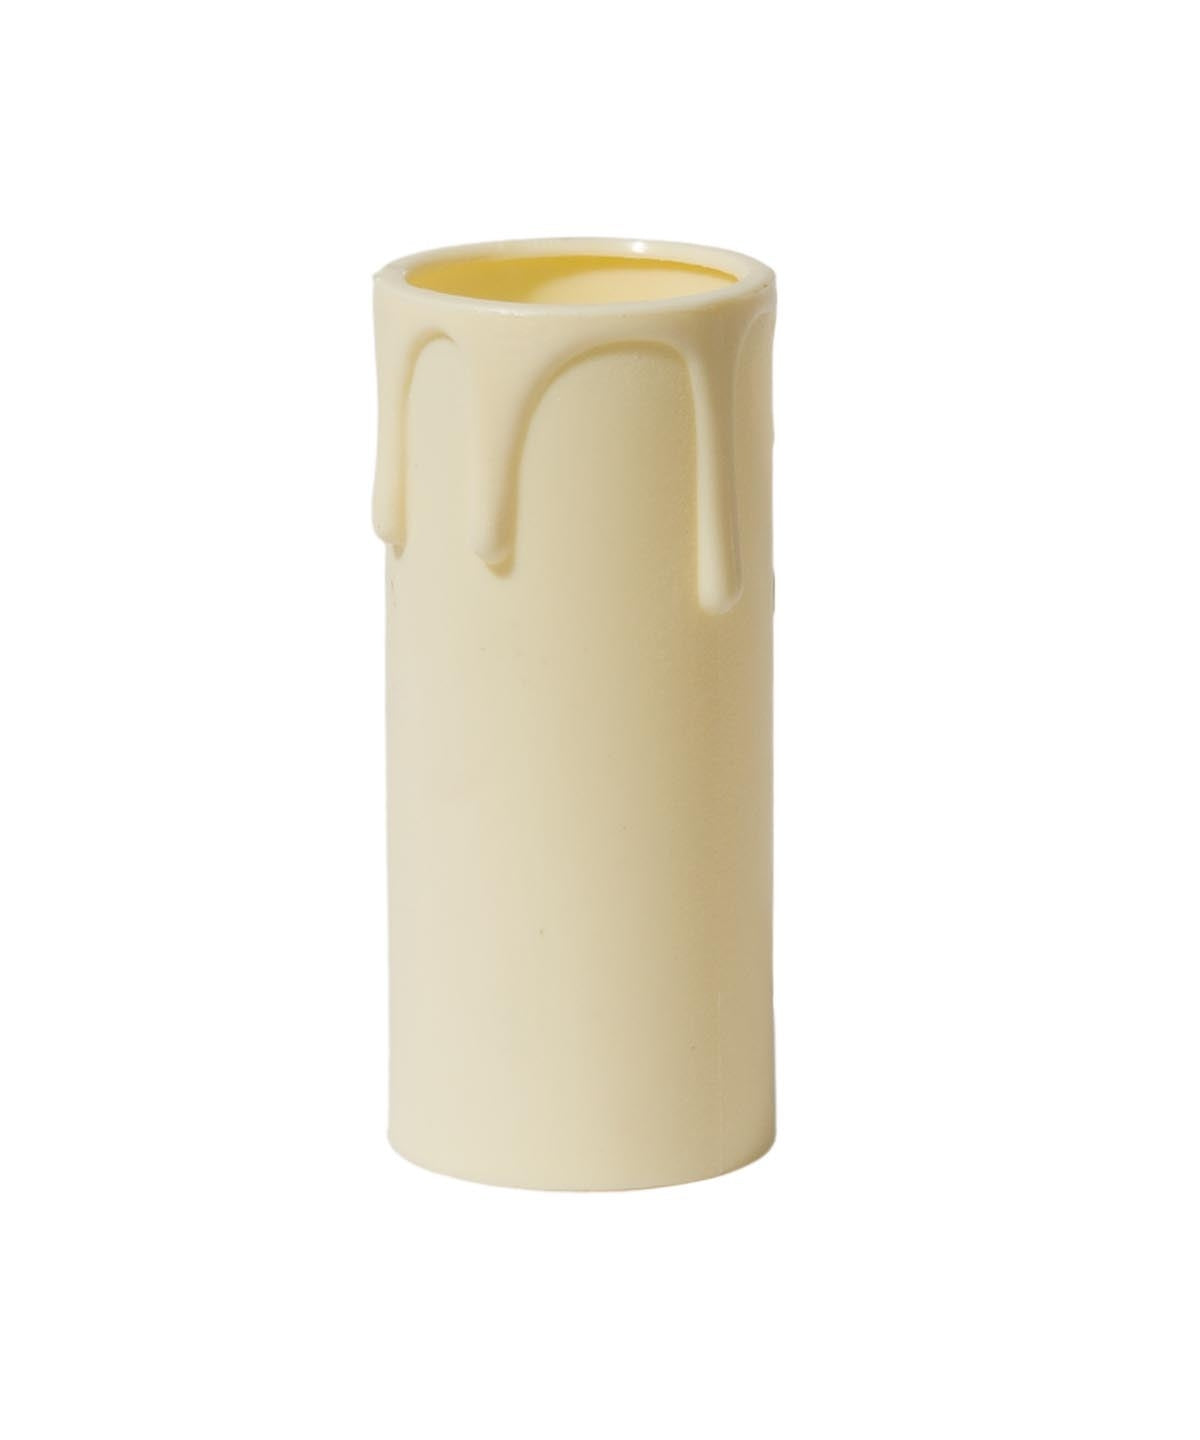 3 Inch Tall Ivory Plastic Medium Sized Candle Cover 